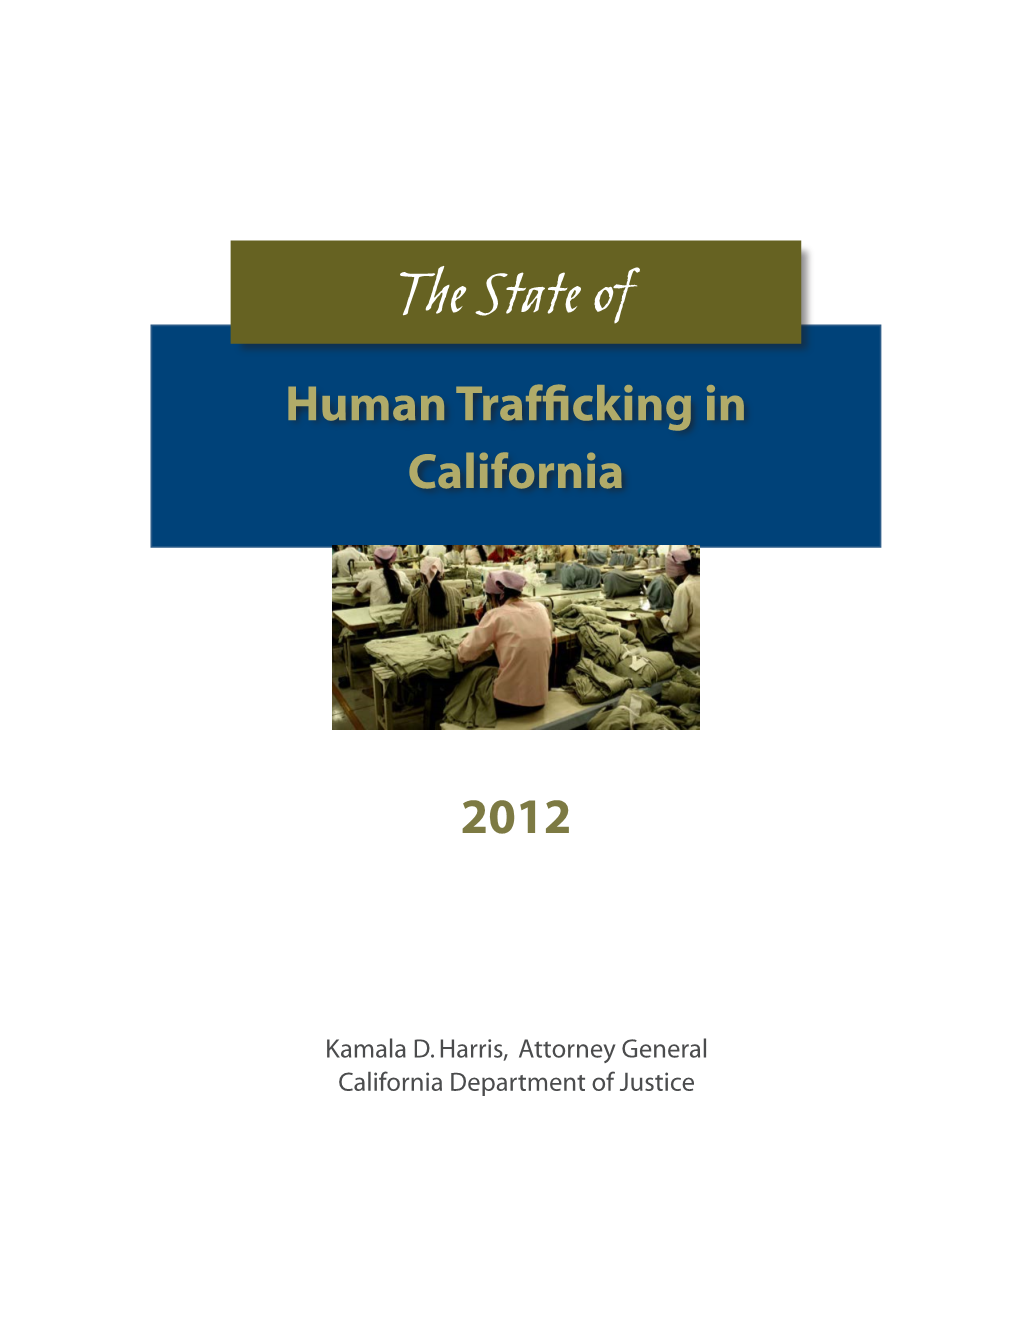 The State of Human Trafficking in California 2012